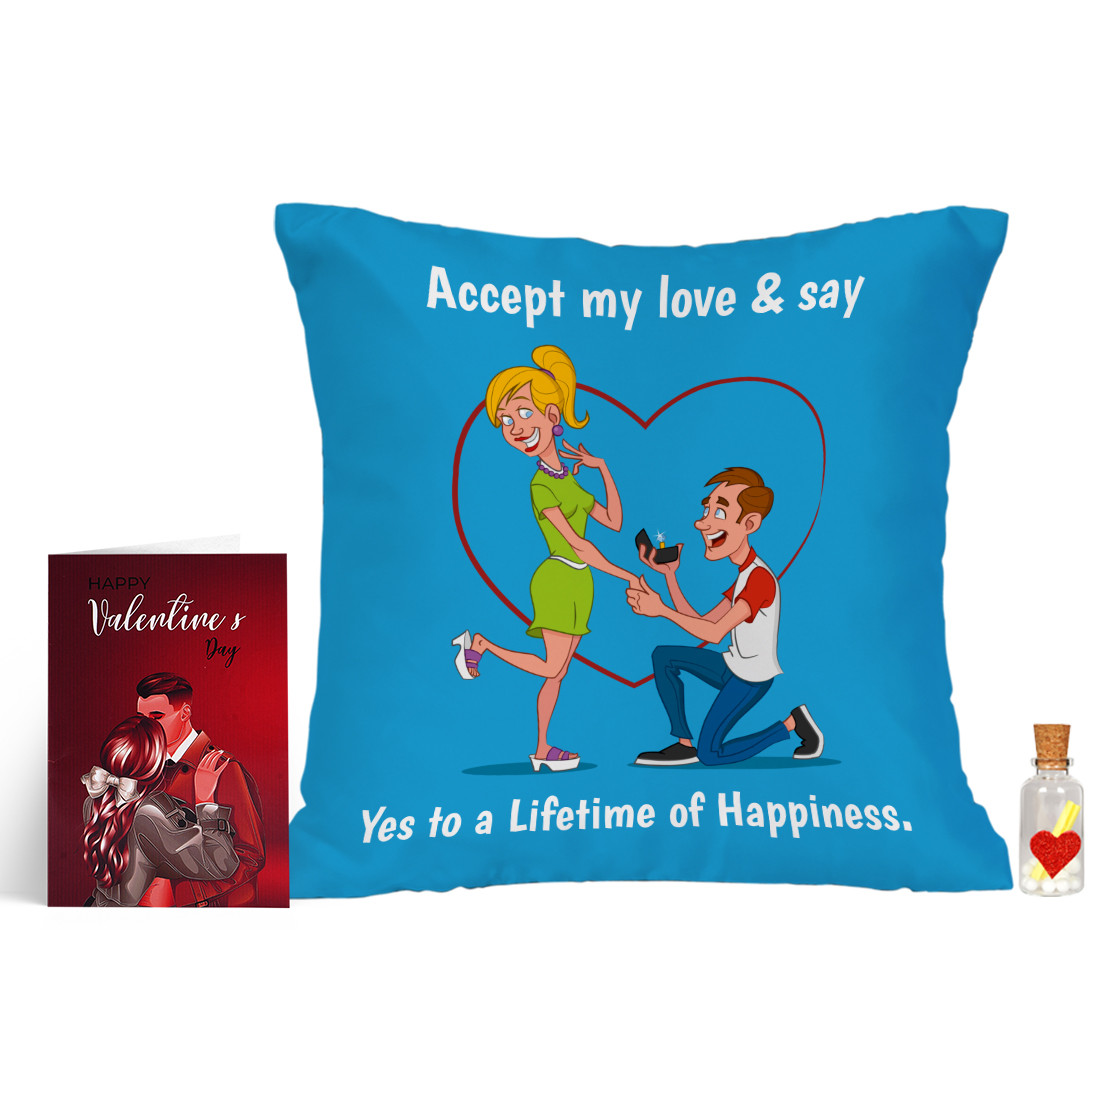 Love You Customized chocolates with Printed On a wrappers, Customized  Chocolate Box, Personalised Chocolate, Custom Wrapped Chocolate, Customized  Chocolate Gifts, Personalised Chocolate Gift Box - Choco Manualart, New  Delhi | ID: 2852528910573